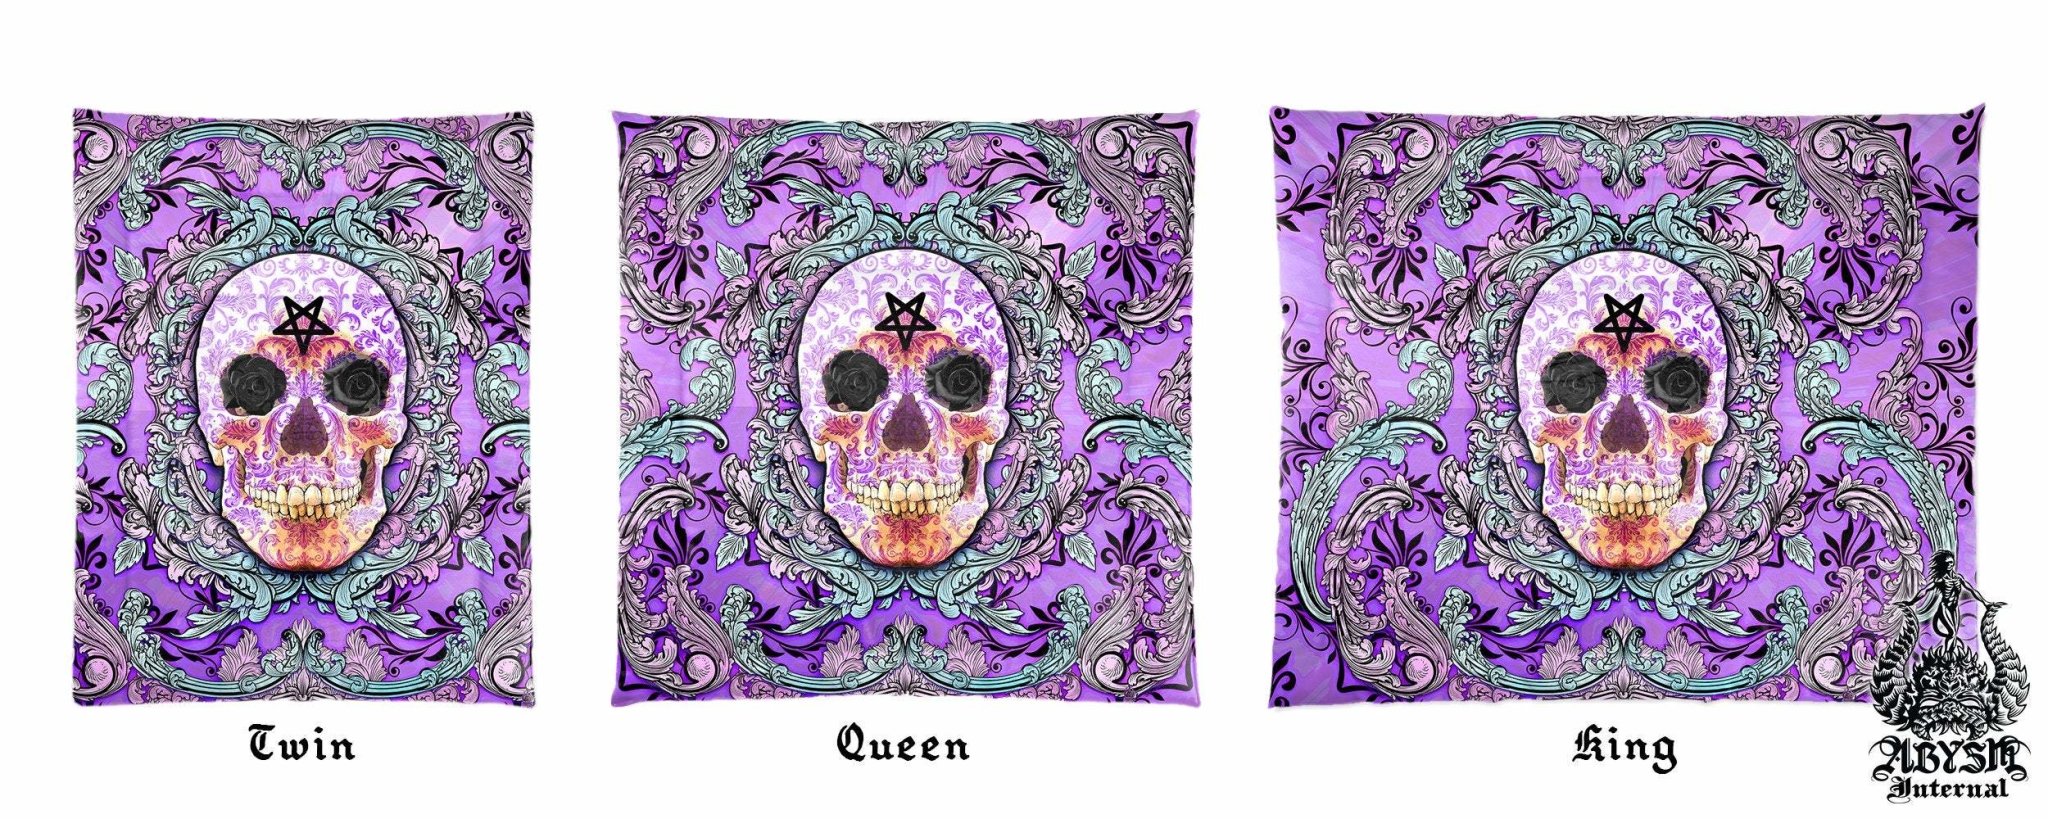 Pastel Goth Bedding Set, Comforter and Duvet, Purple Skull Bed Cover and Bedroom Decor, King, Queen and Twin Size - Black Roses - Abysm Internal